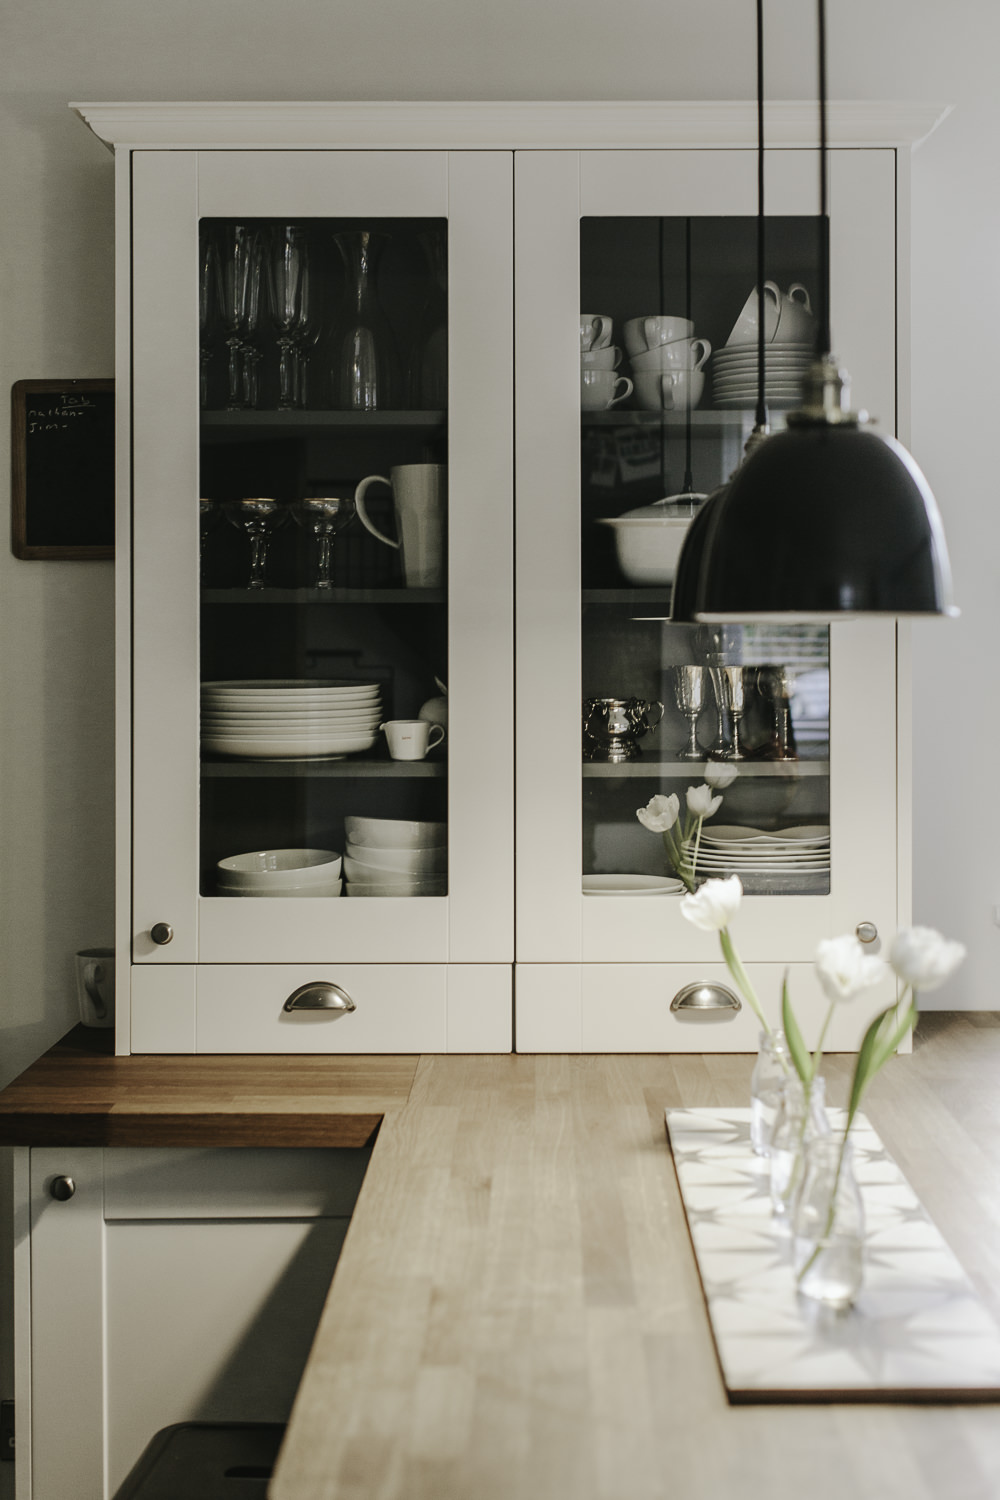 How To Paint Kitchen Cupboards Rock My Style Uk Daily